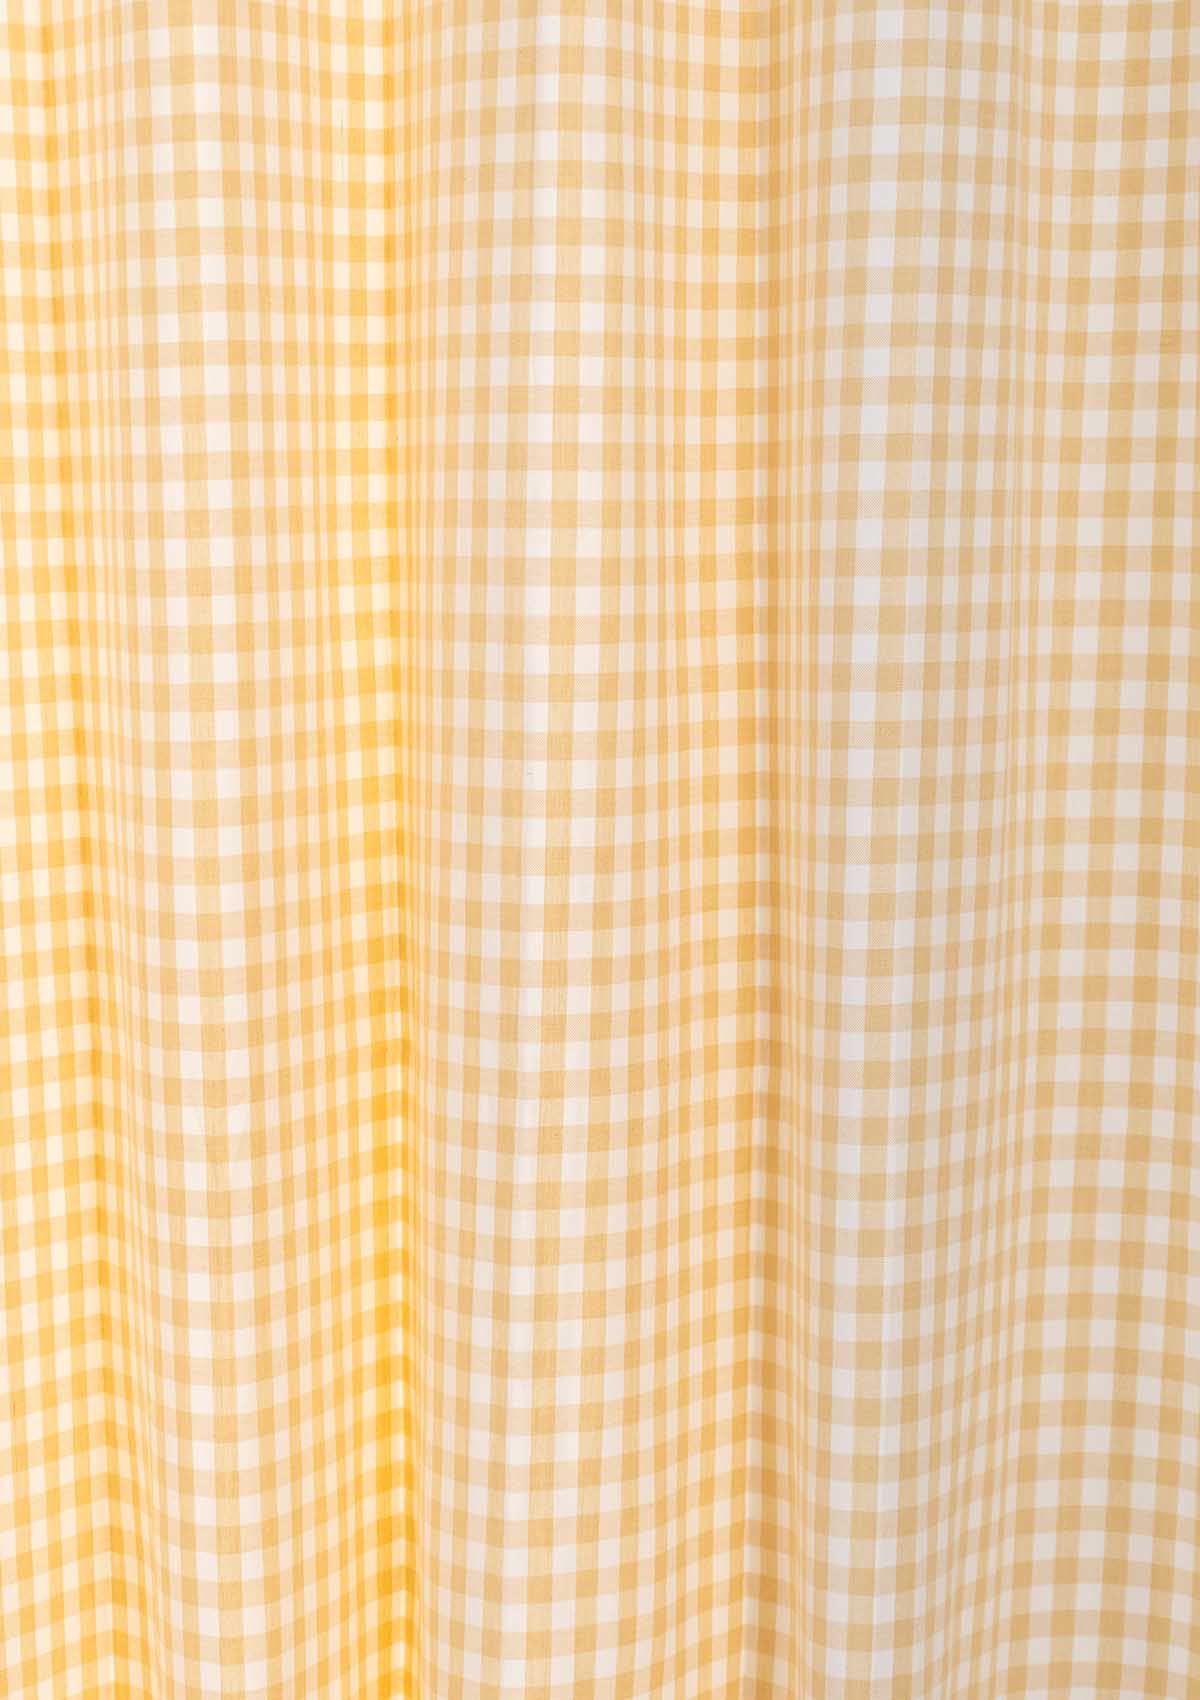 Woven Gingham Cotton Fabric - Ivory